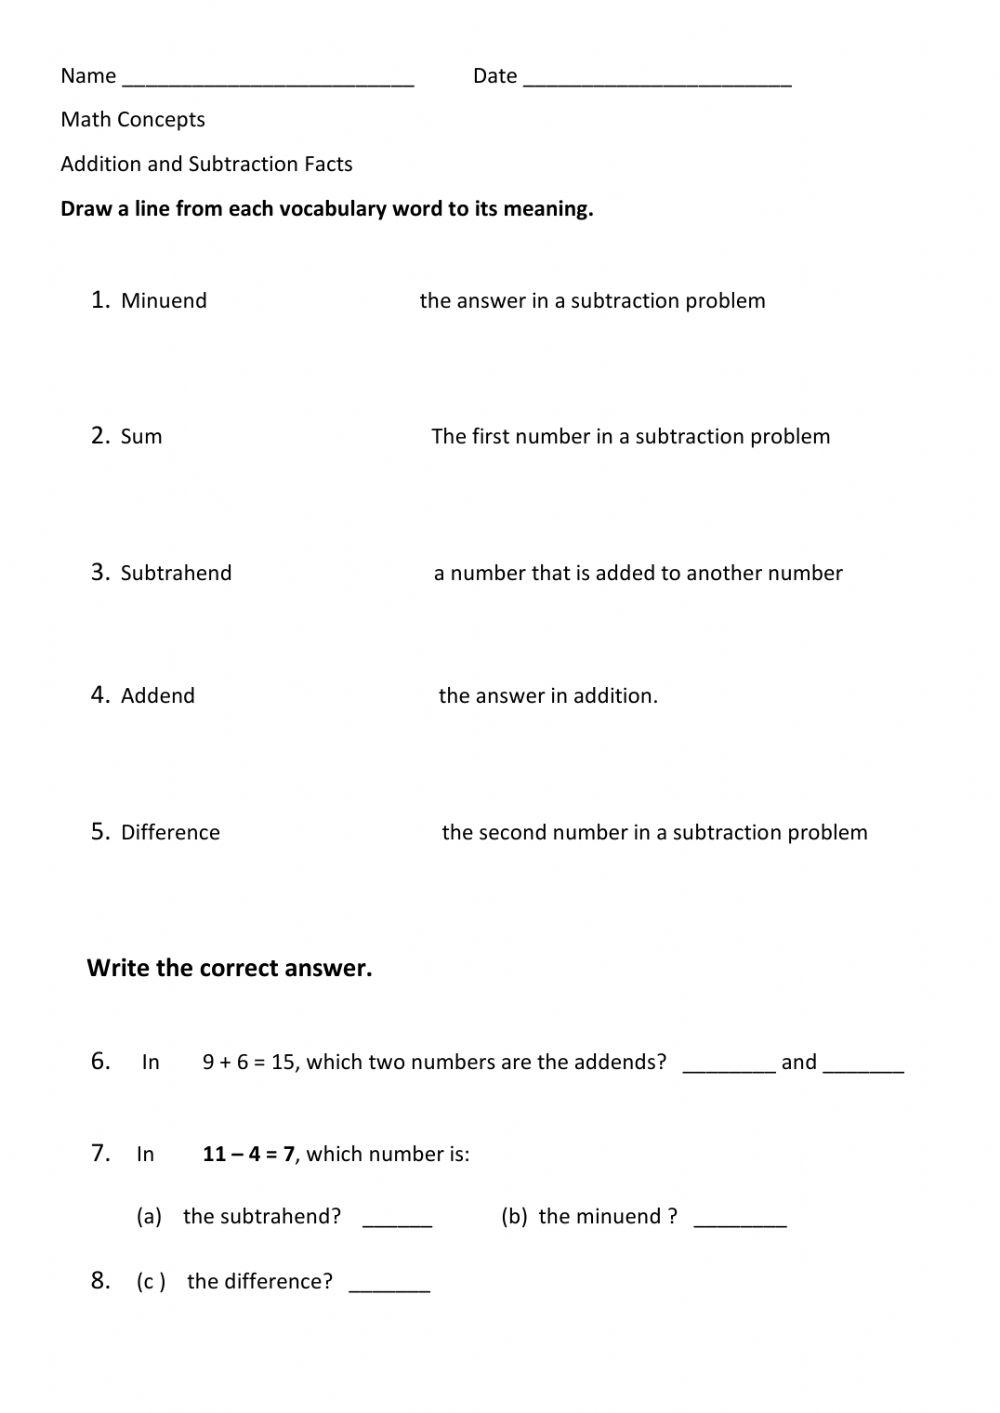 Additition and Subtraction Facts Concept